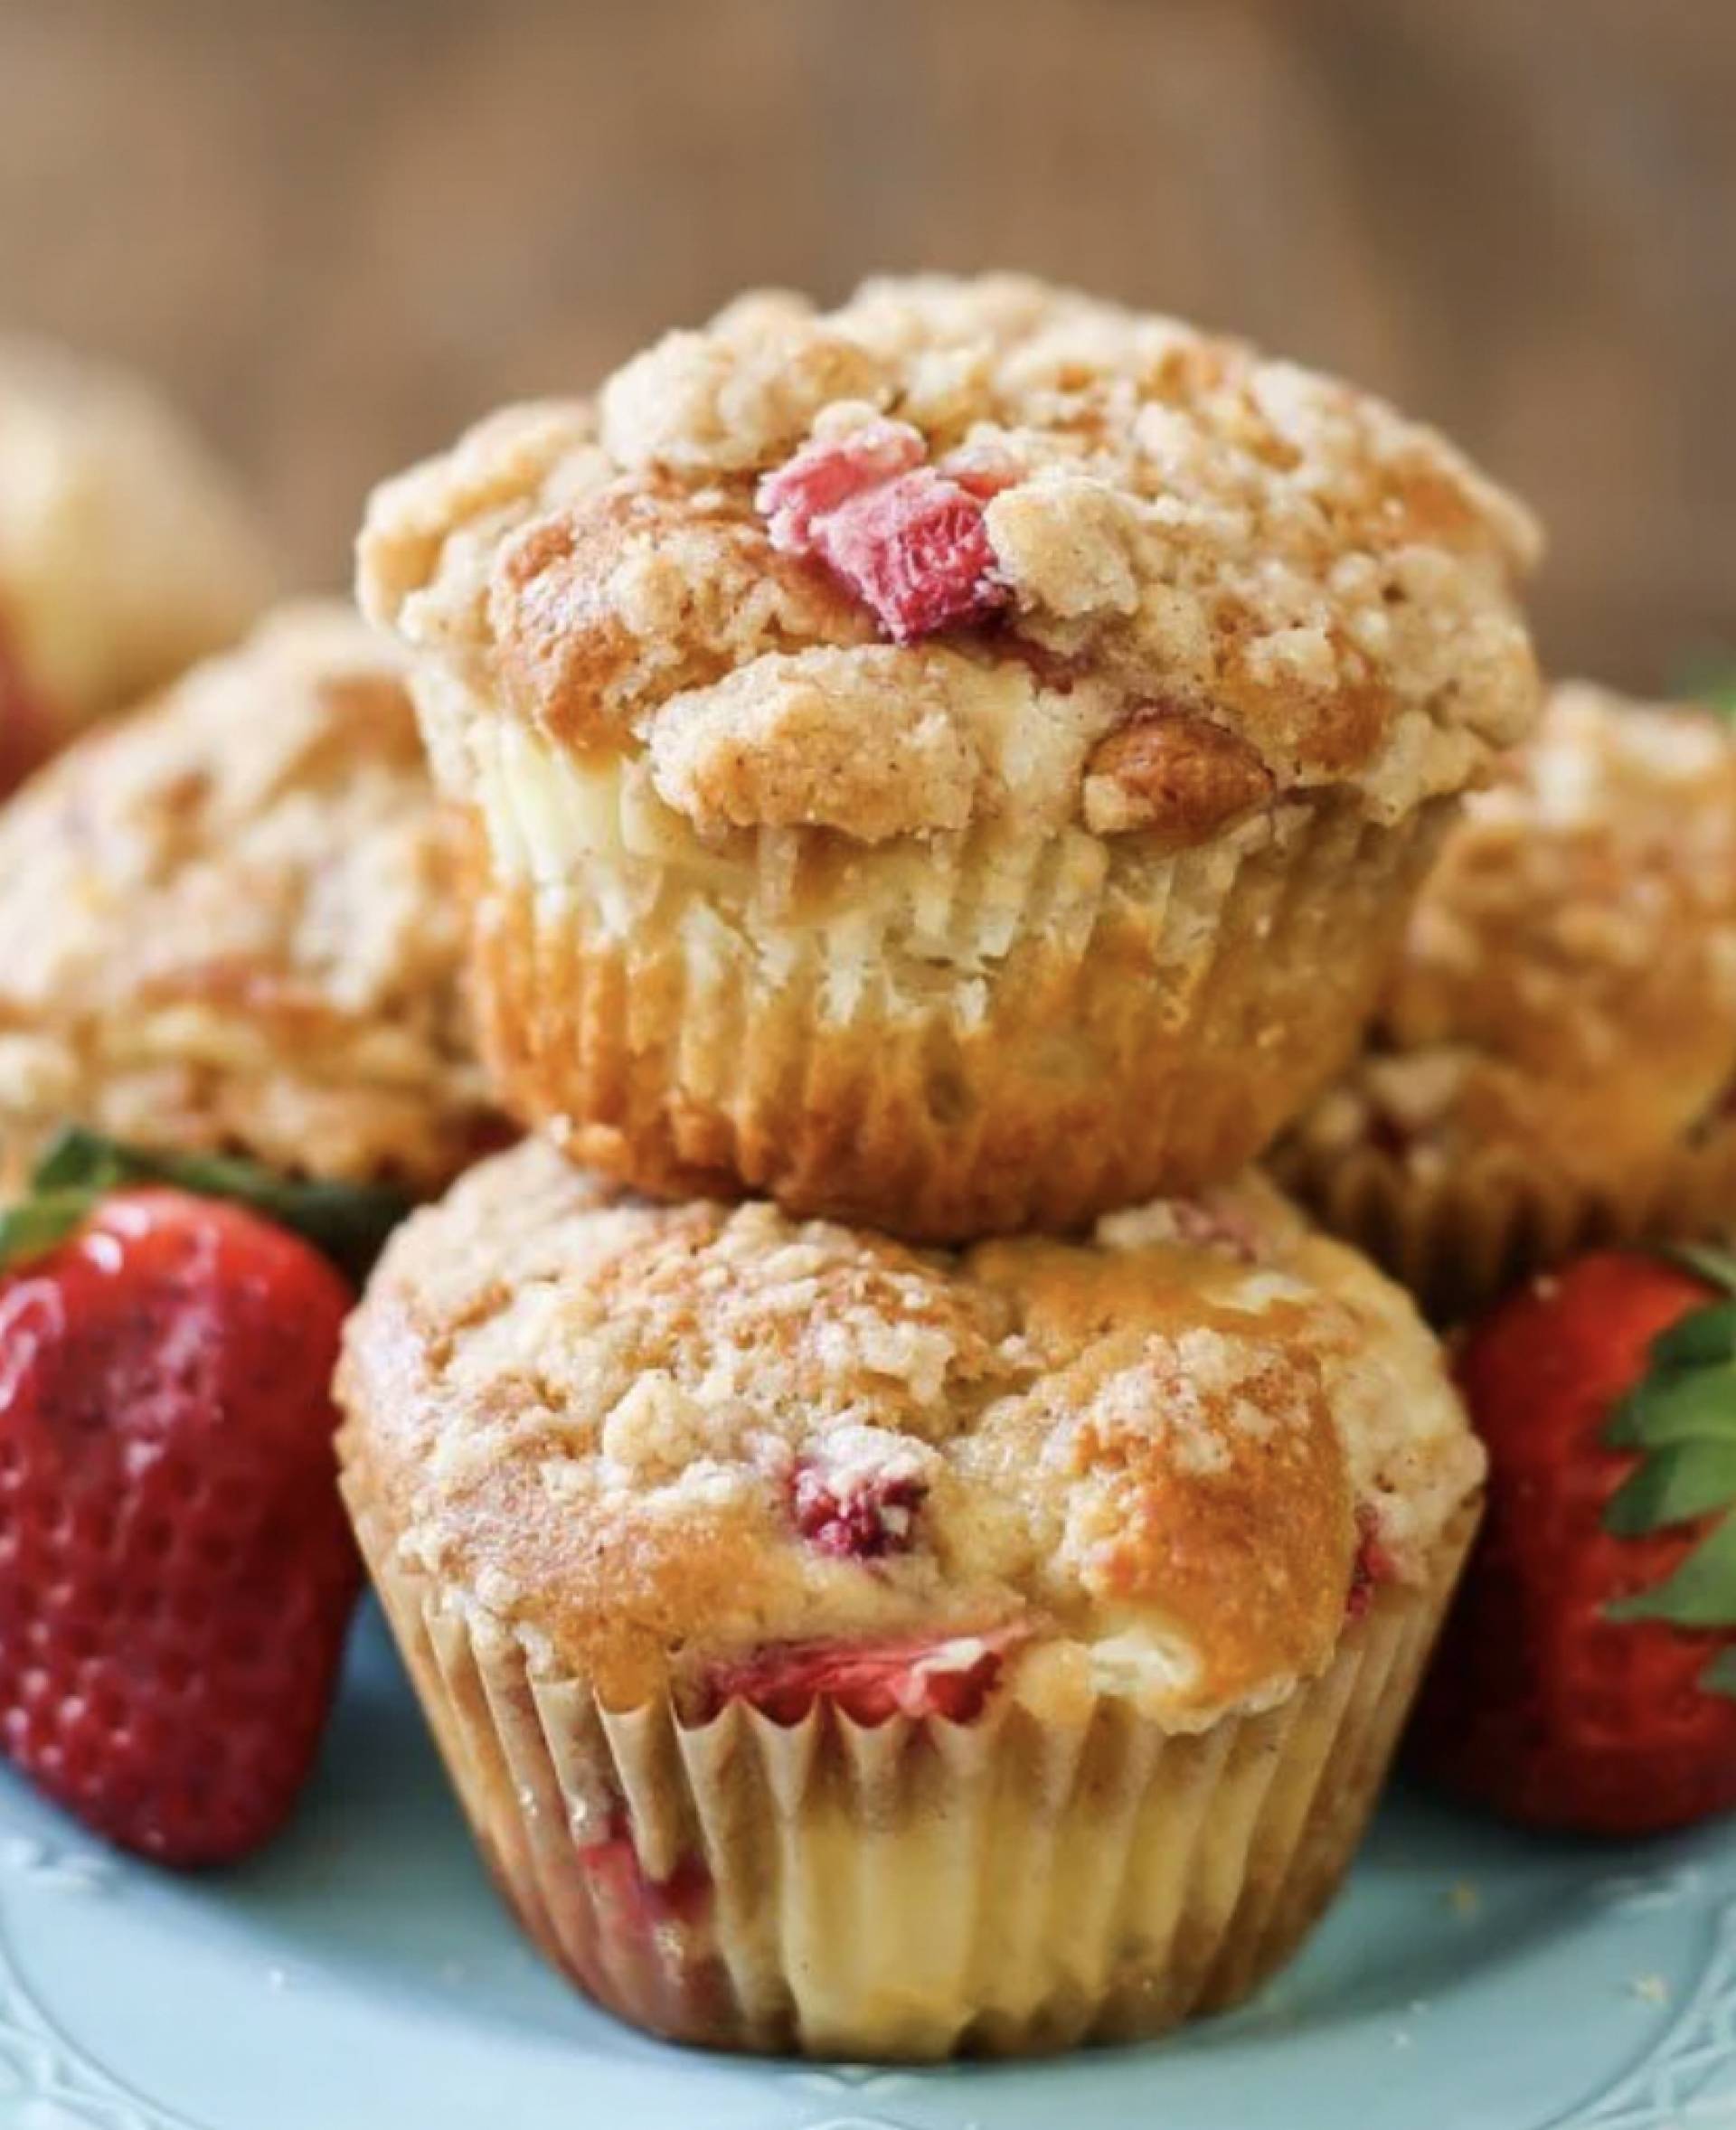 Strawberry Muffin and Fruit